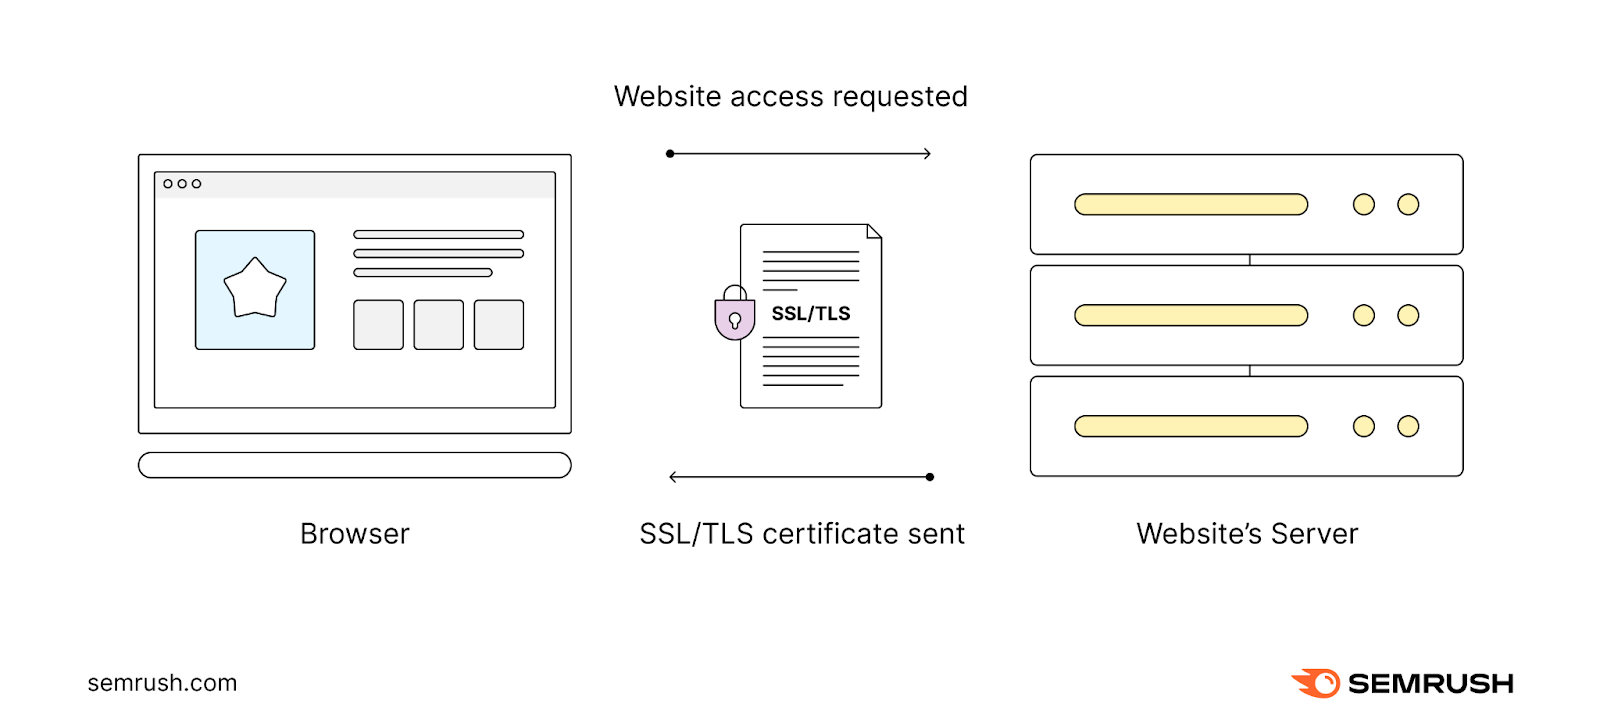 A website's server sending SSL/TLS certificate to a web browser attempting to connect to the website using HTTPS